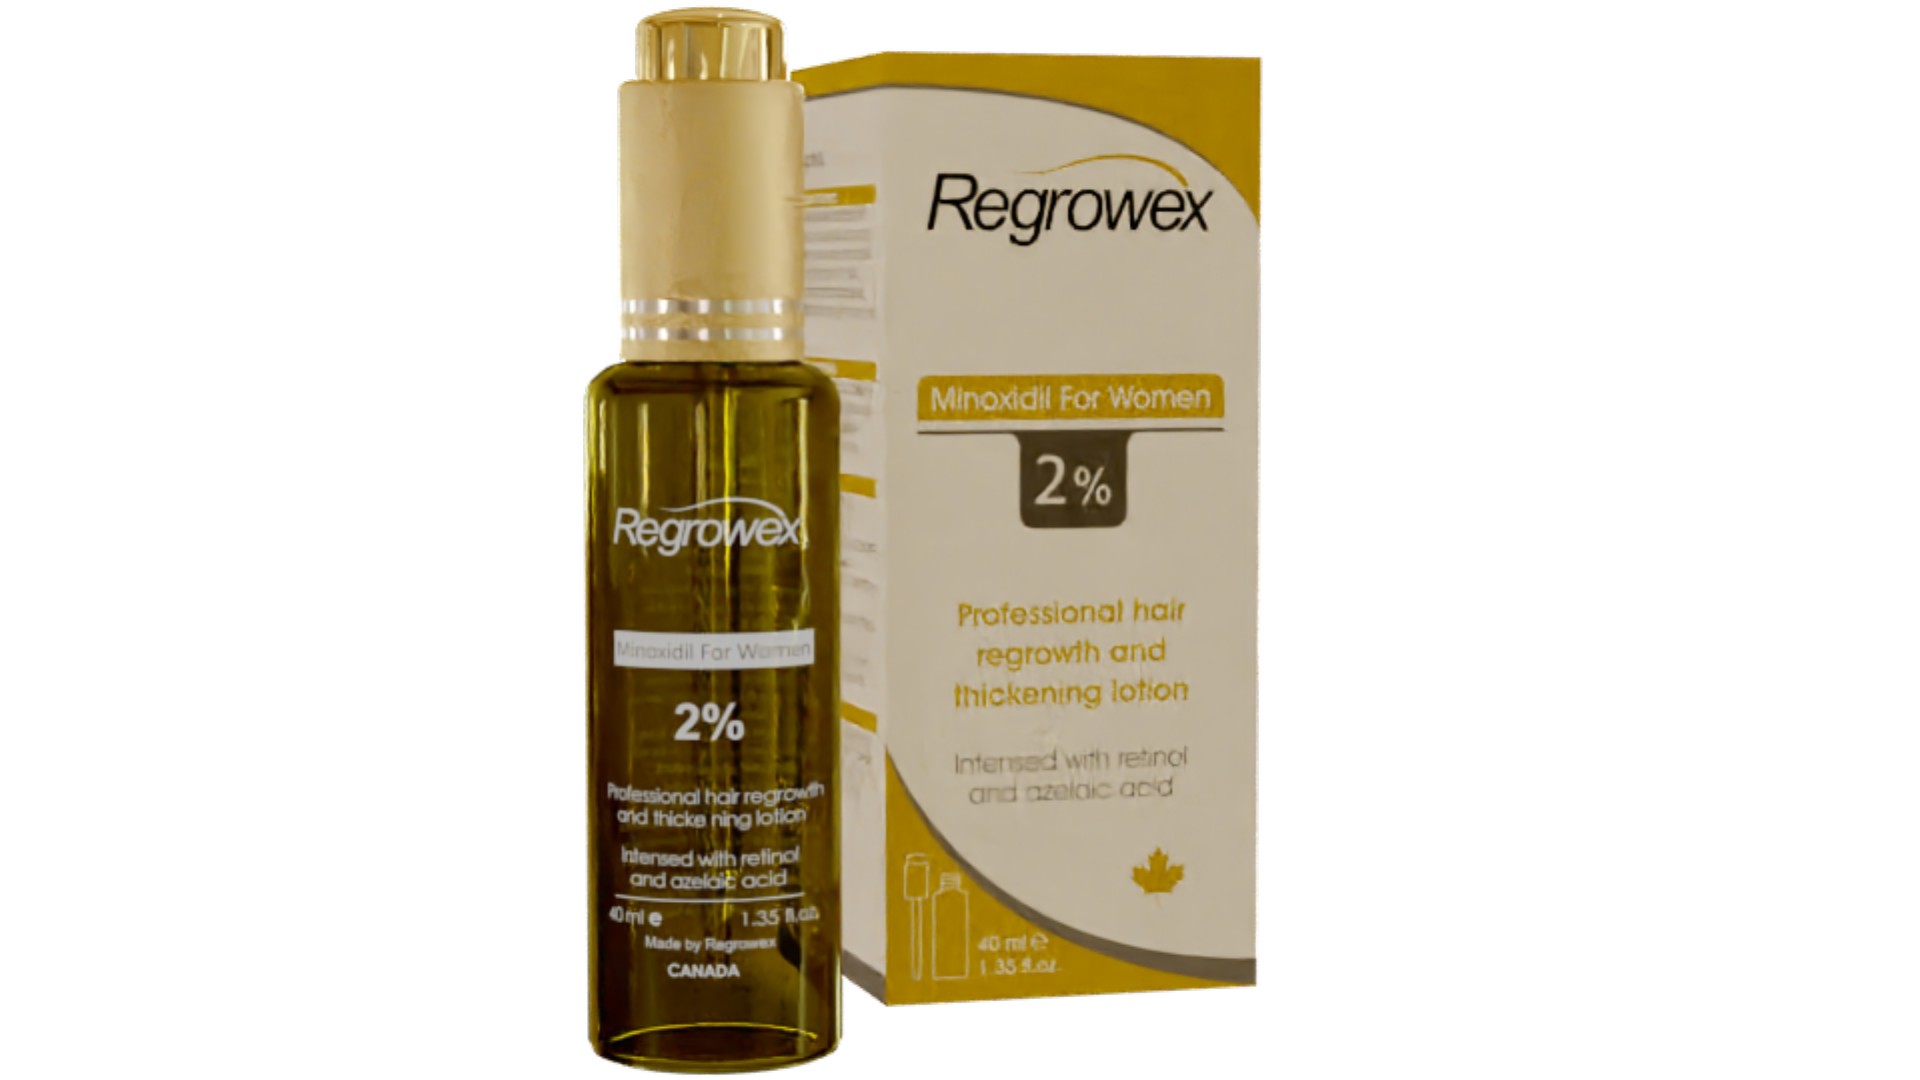 regrowex minoxidil solution 2% bottle with box